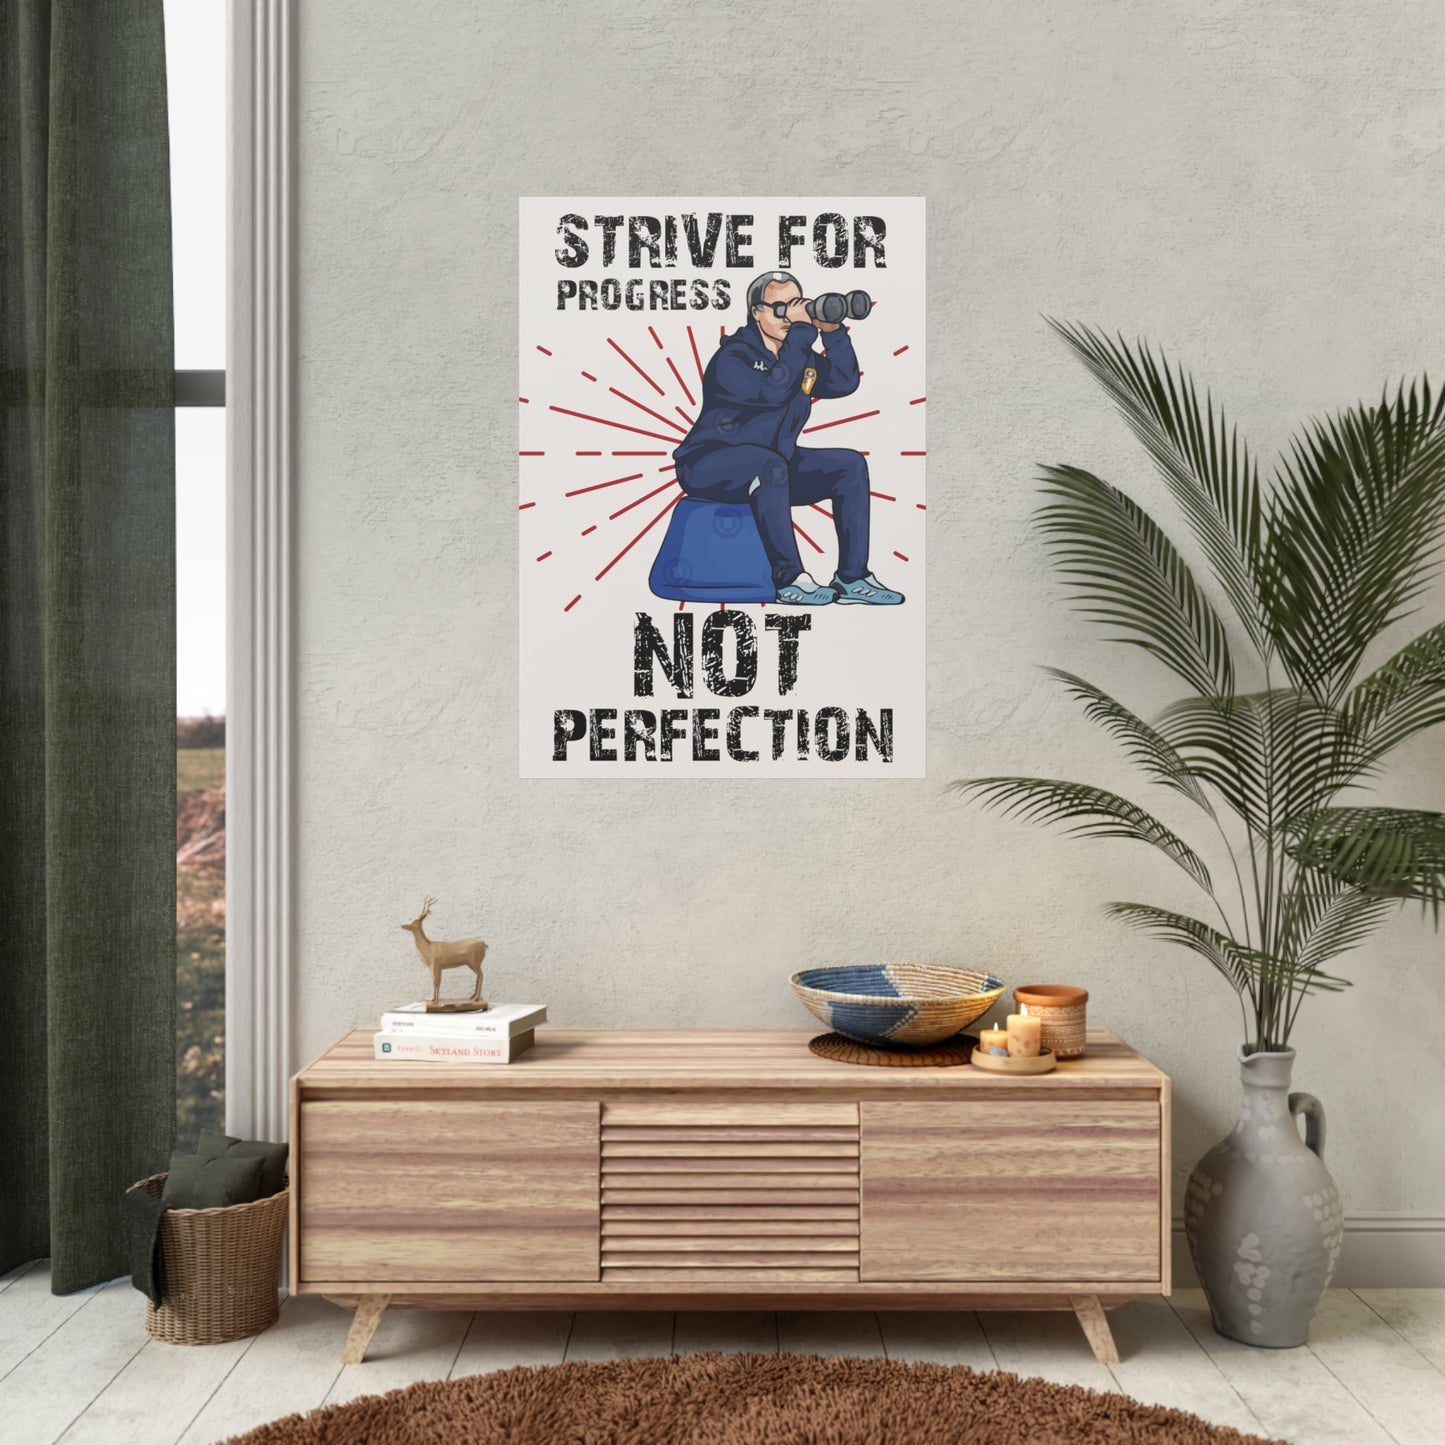 Strive for progress not perfection poster leeds united